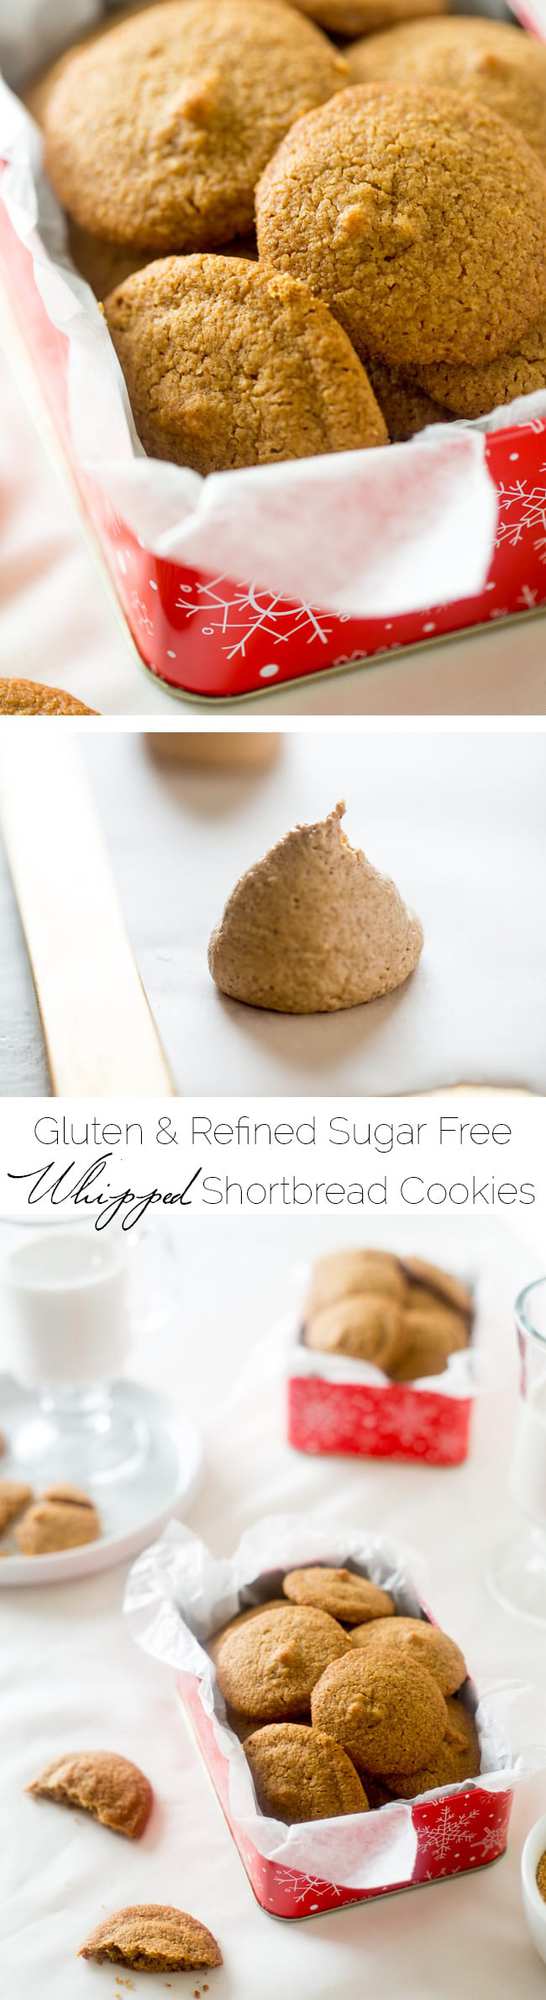 Whipped Gluten Free Shortbread Cookies - These light, airy and melt-in your mouth Christmas cookies are made with oat flour and coconut sugar so they're a refined-sugar free, healthier cookie for only 77 calories! | Foodfaithfitness.com | @FoodFaithFit